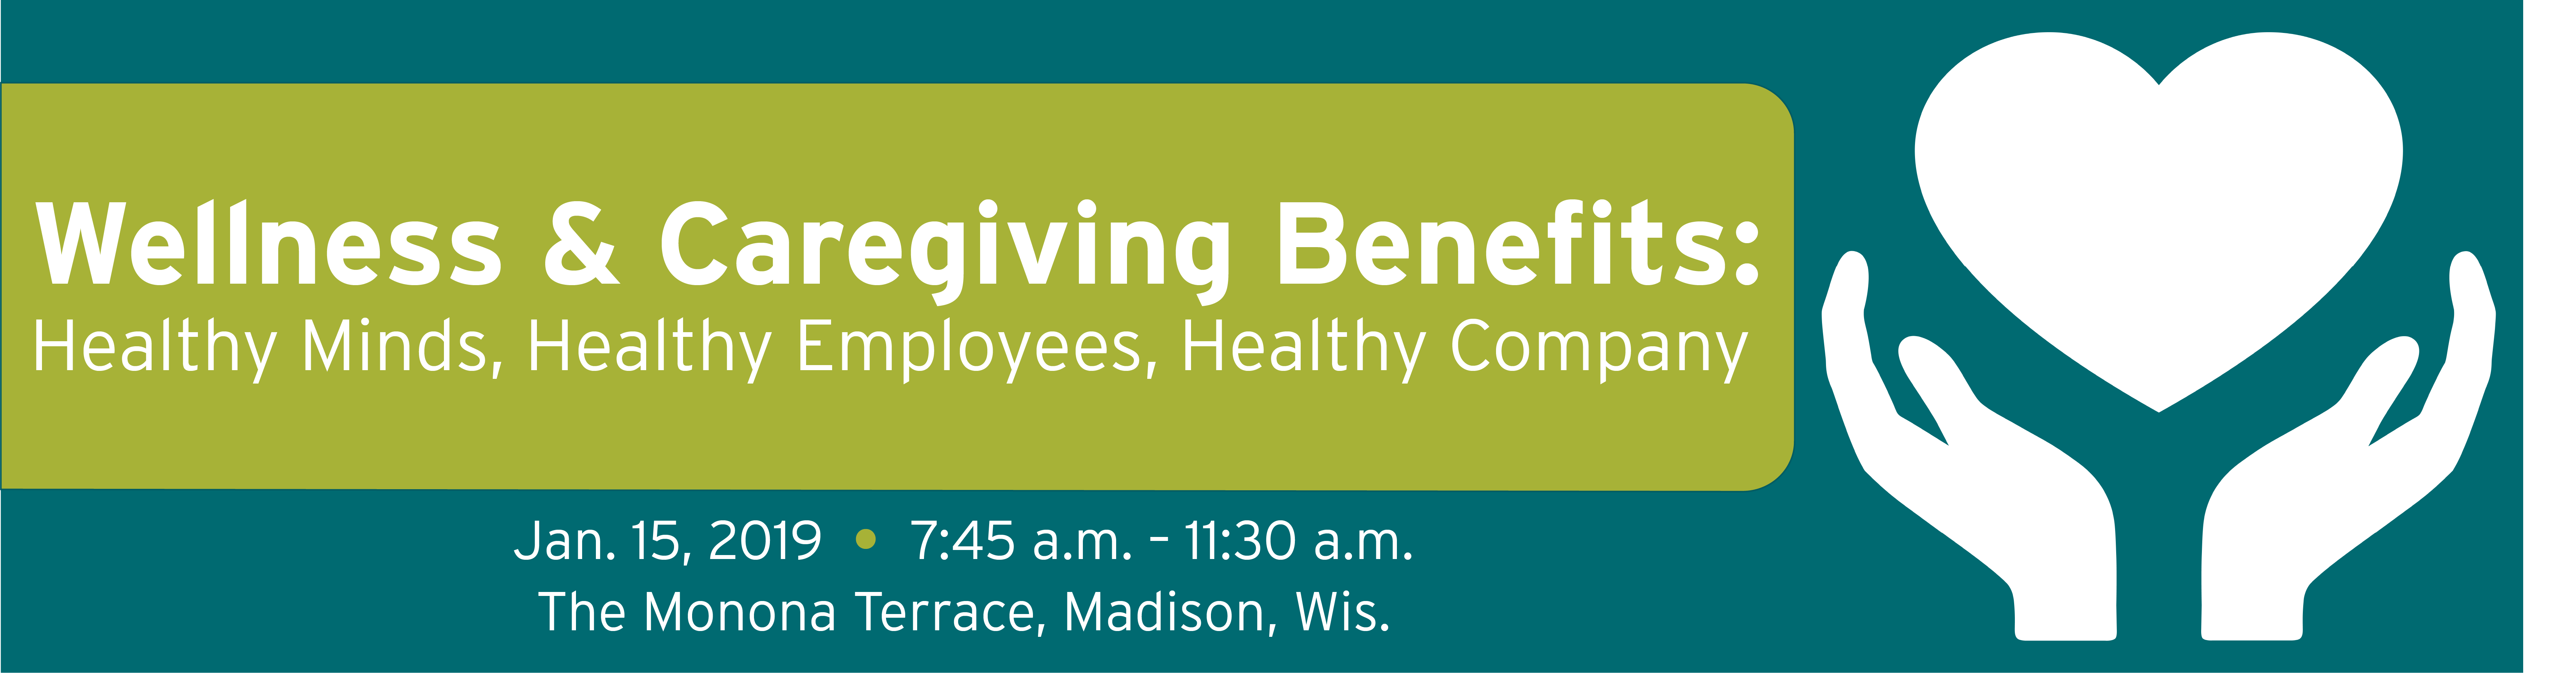 You will hear from experts in the field of wellness and benefit offerings as well as a local employer that has taken the initiative of offering this benefit that is helping tremendously with caregiving.